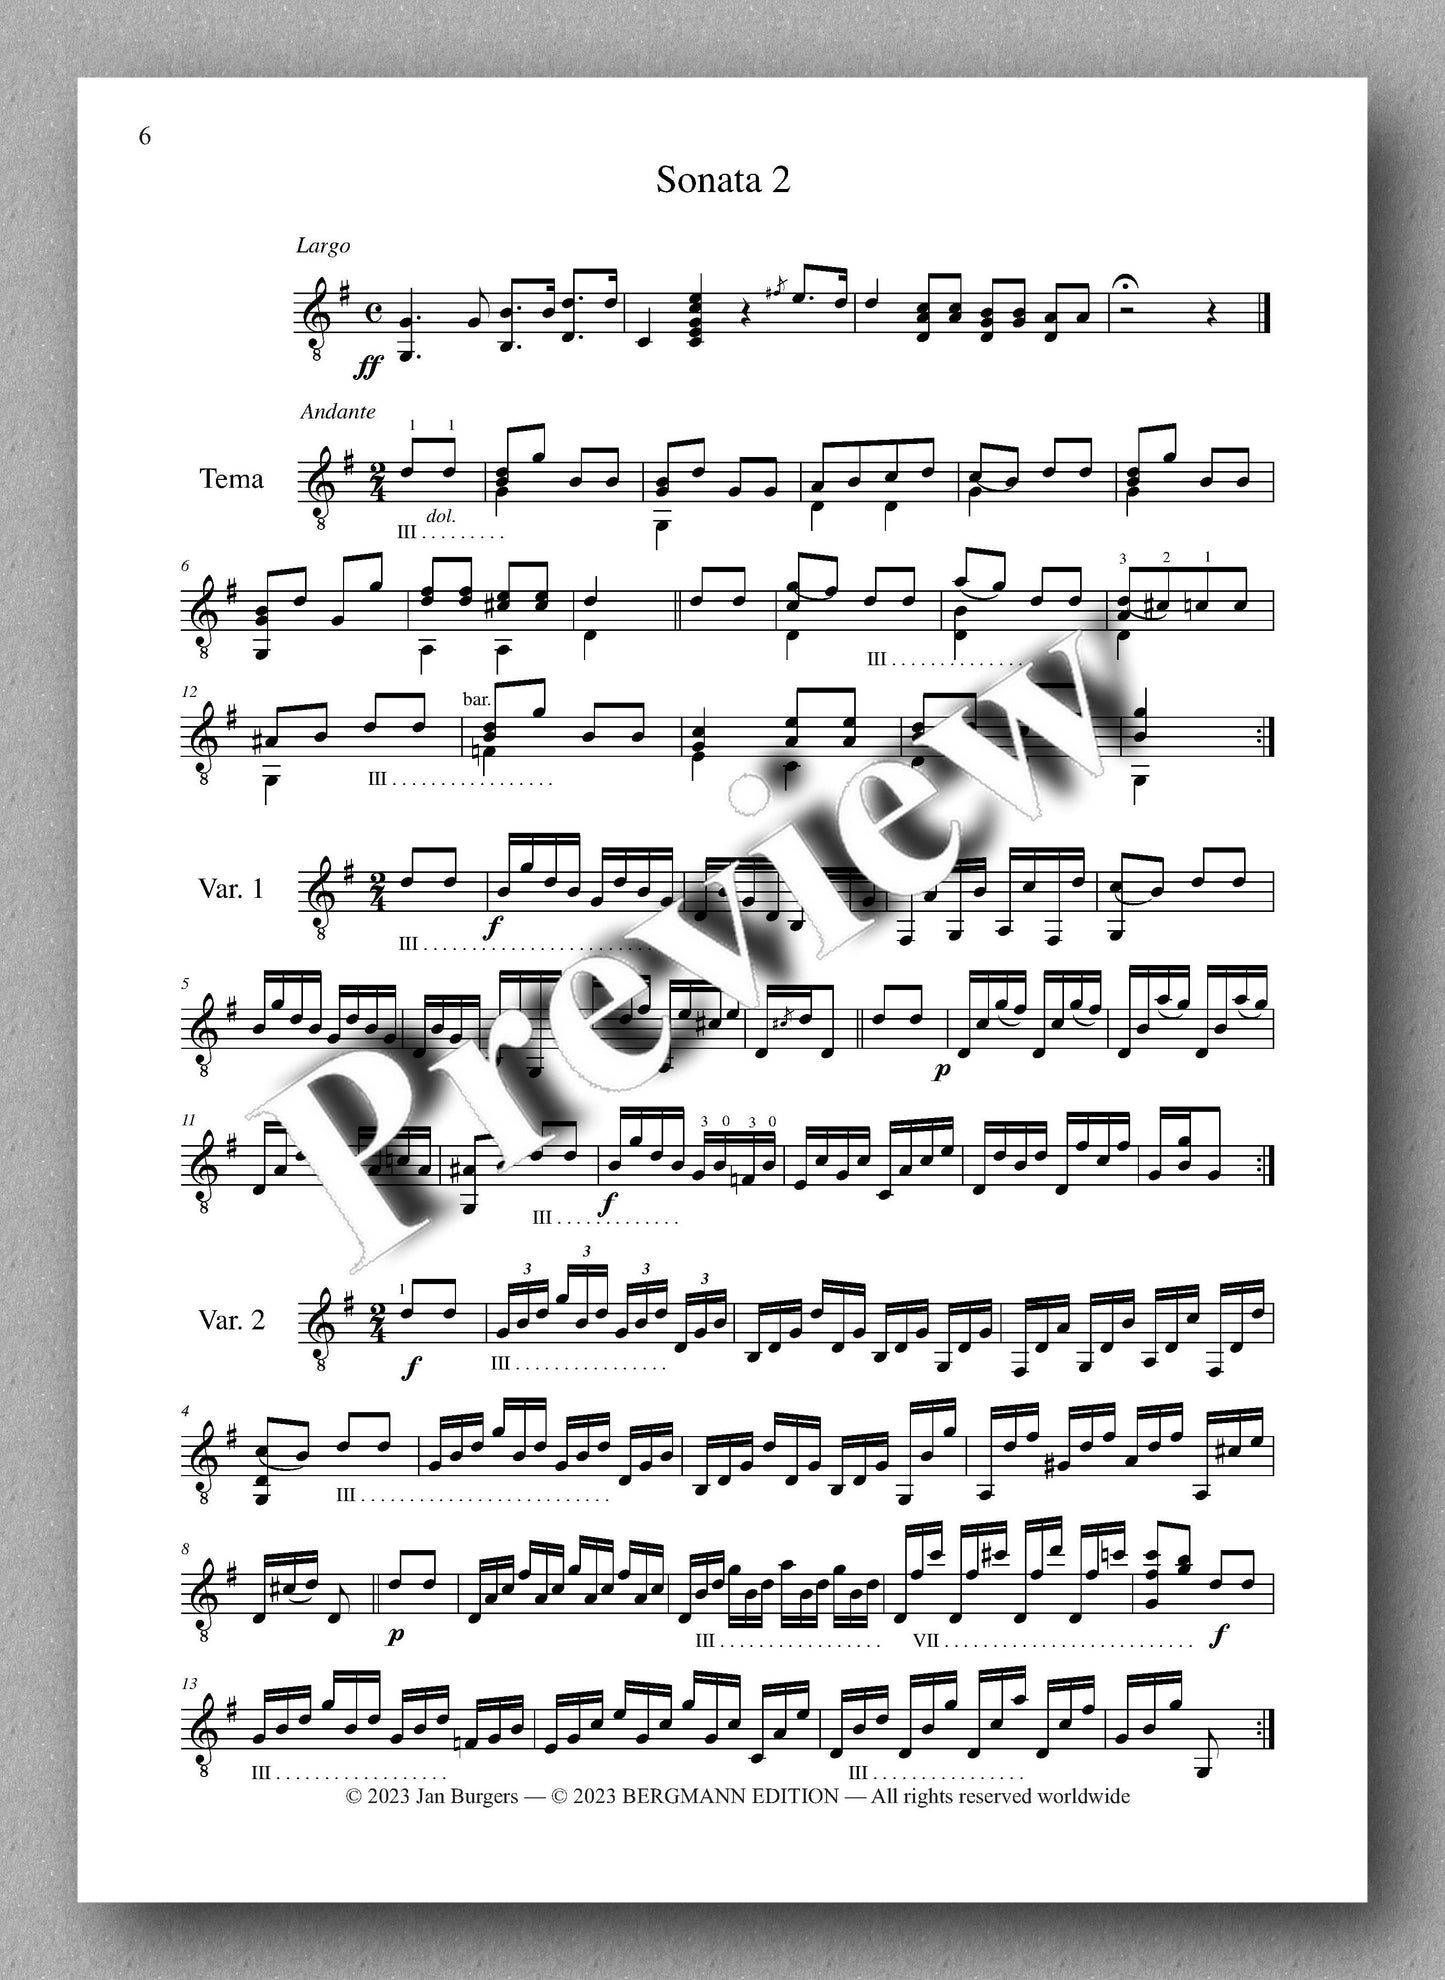 Molino, Collected Works for Guitar Solo, Vol. 2 - preview of the music score 2